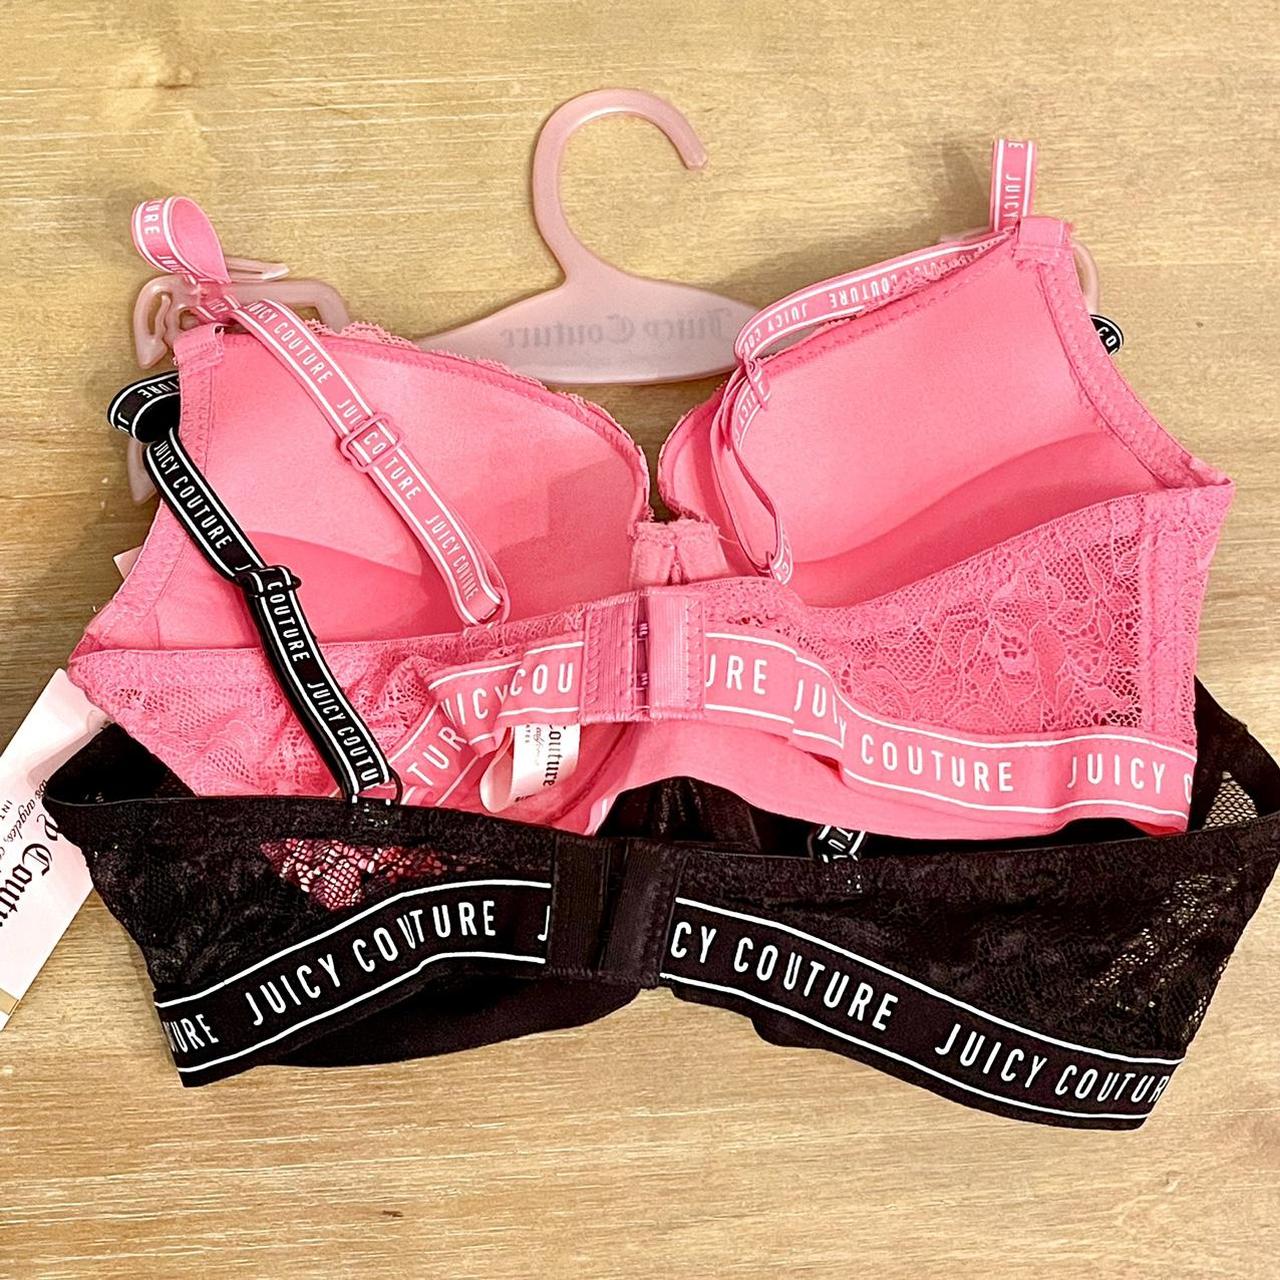 34C {Juicy Couture} Pink Lace Bra and Panty Set - Intimates & Sleepwear